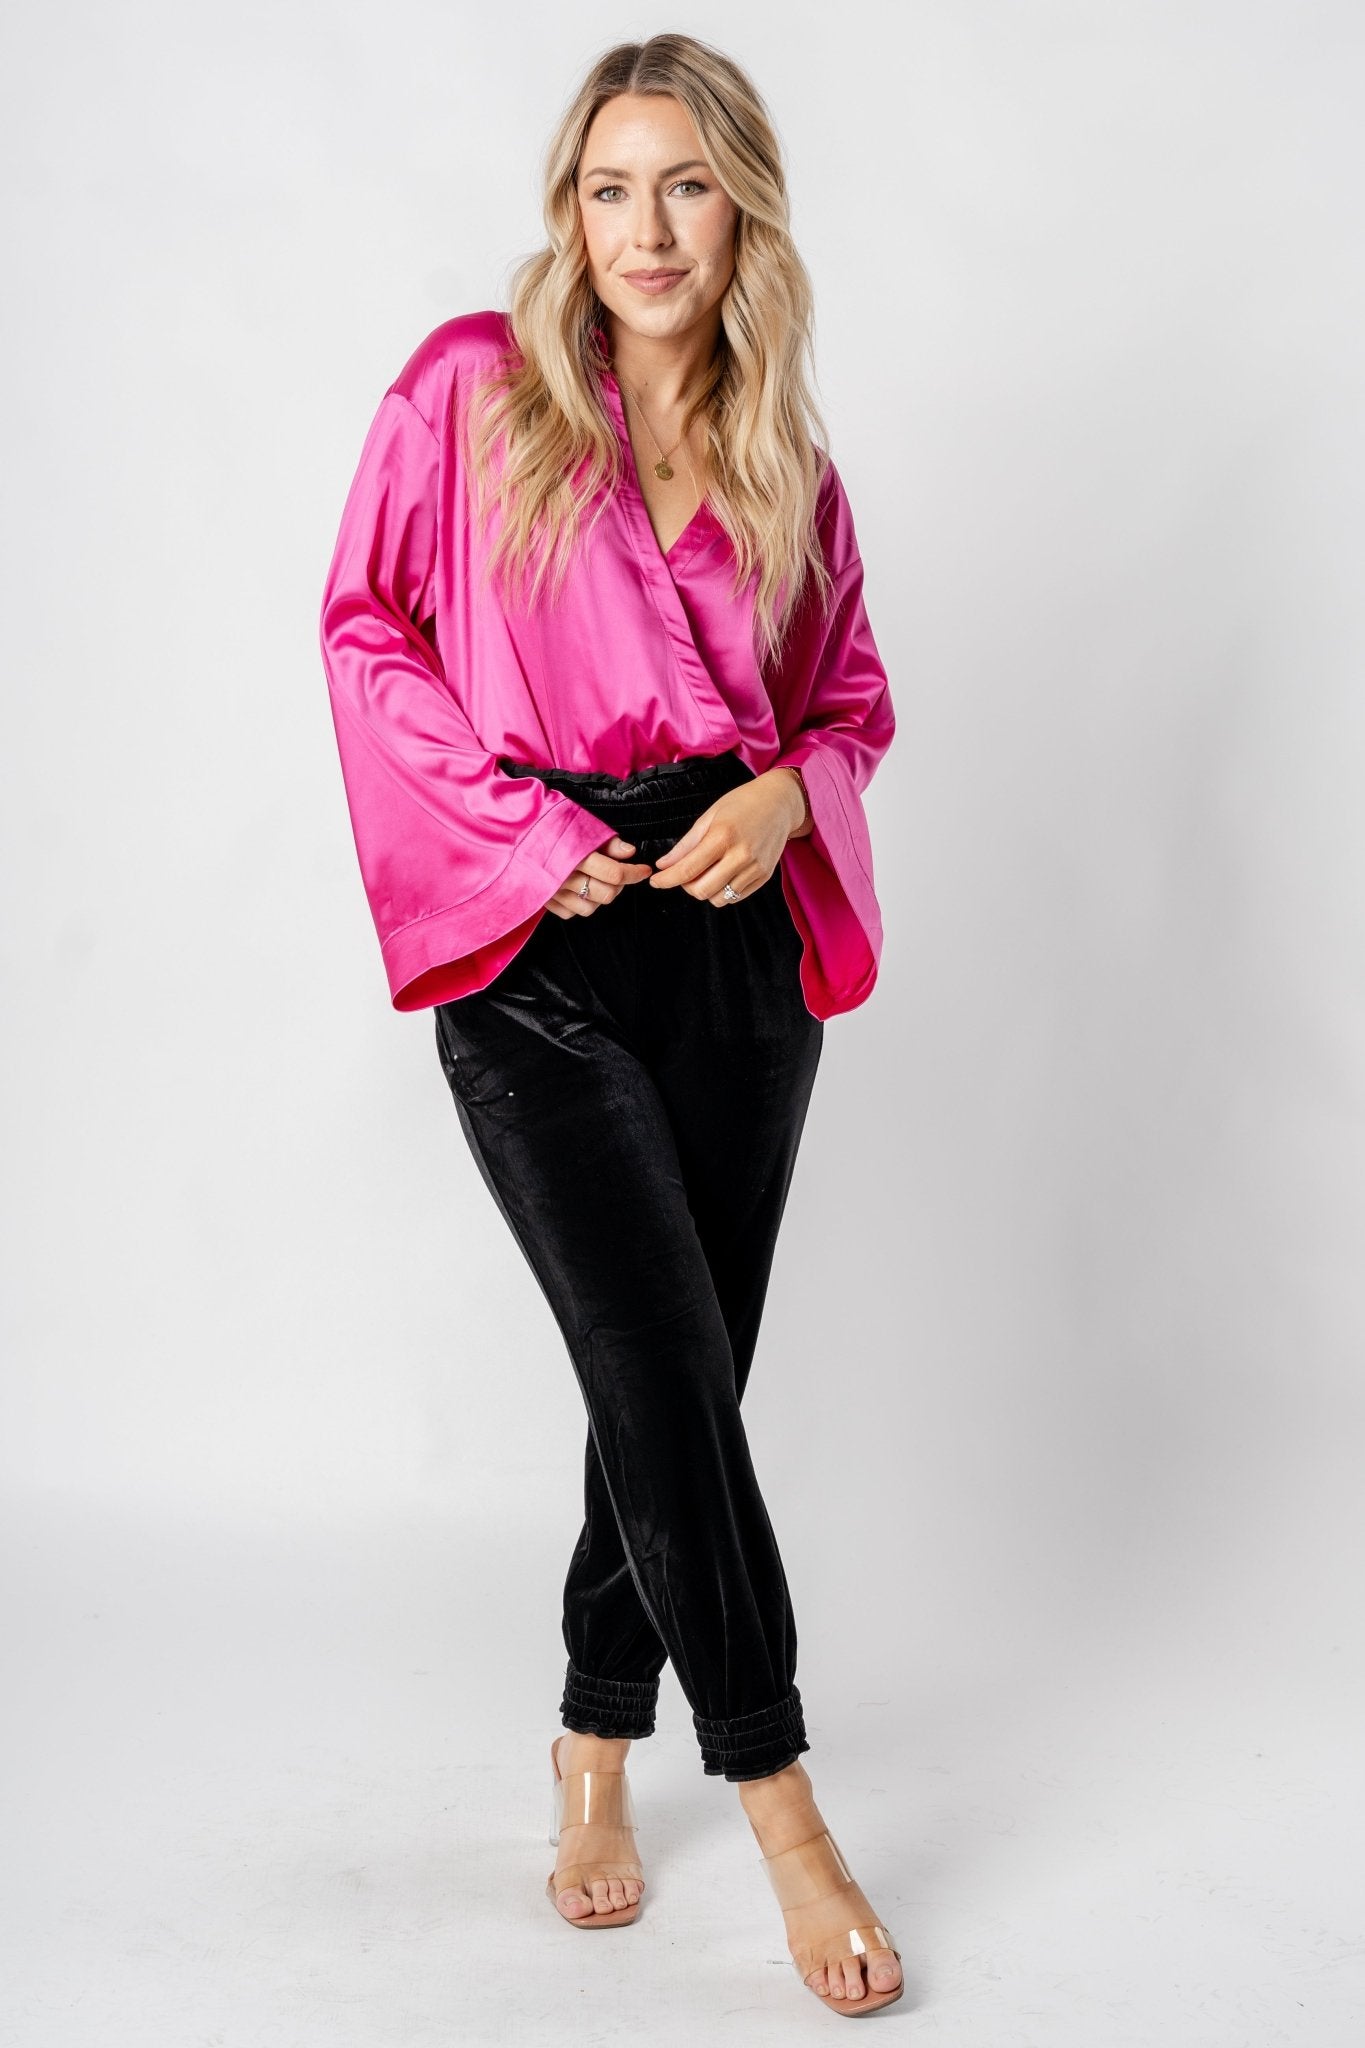 Satin shirt bodysuit magenta - Affordable New Year's Eve Party Outfits at Lush Fashion Lounge Boutique in Oklahoma City